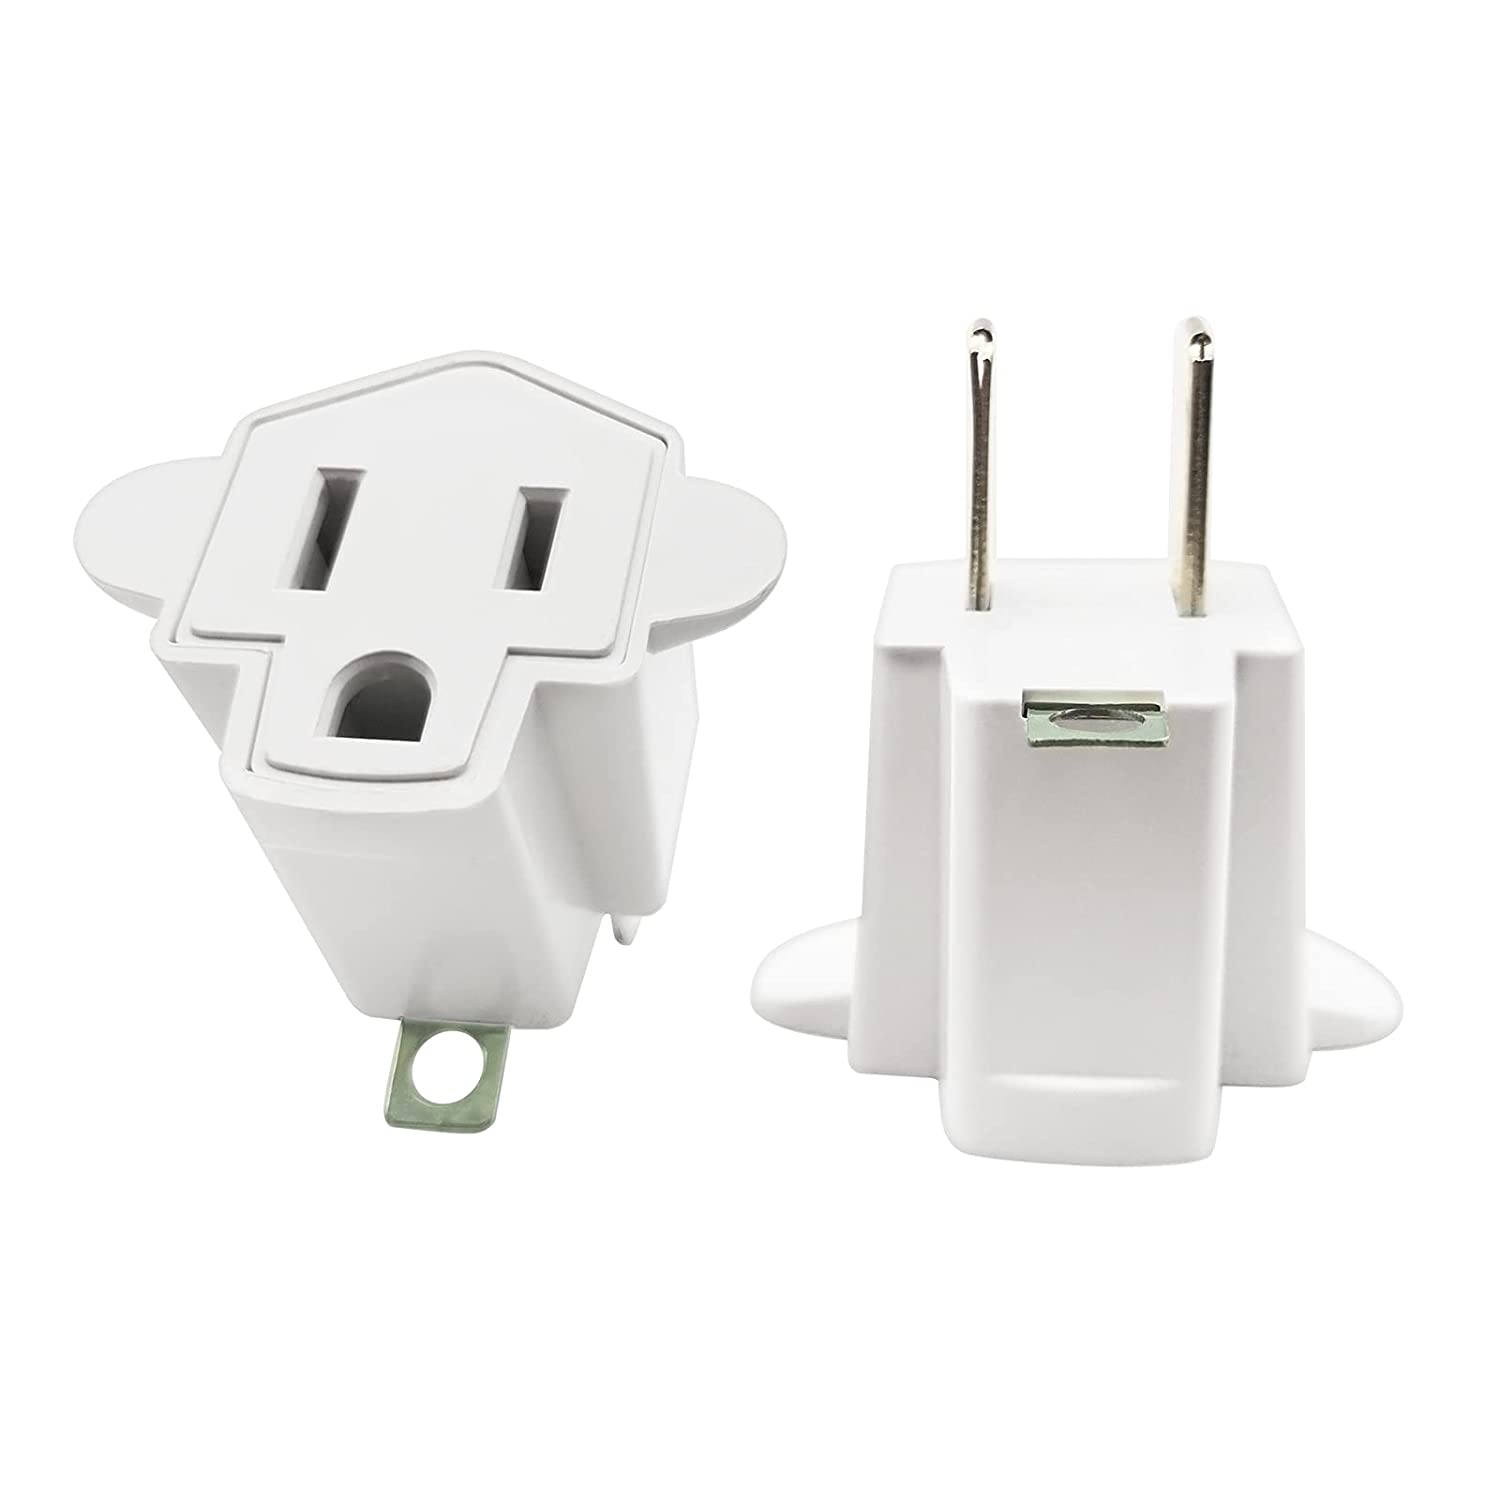 YOELVN Home & Travel 3-To-2 Prong Plug Adapter, 2-Count